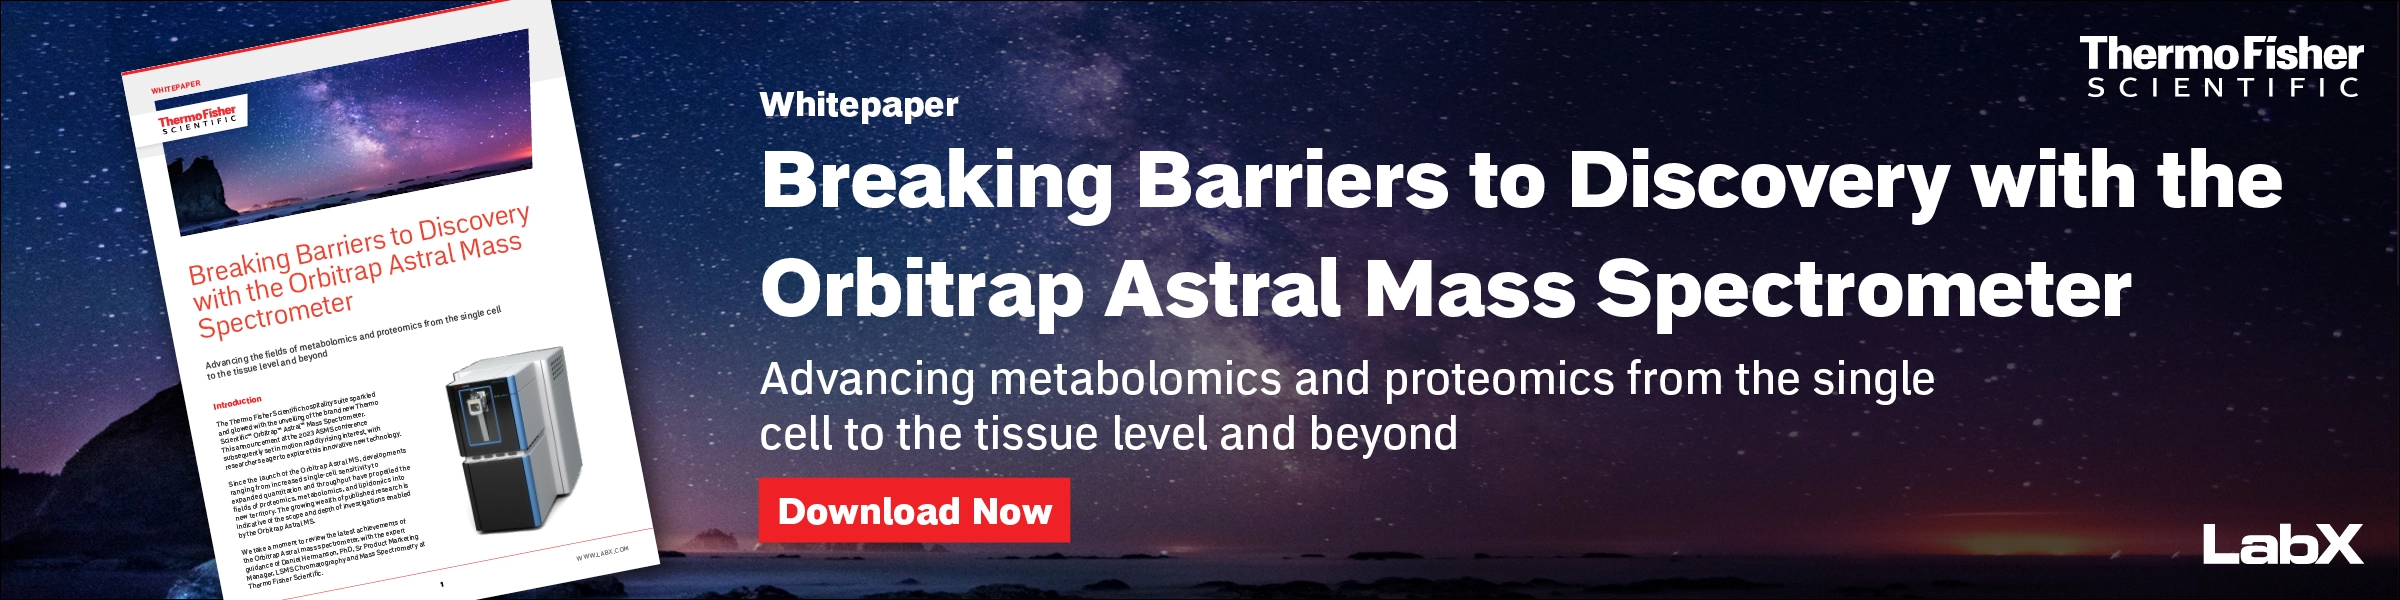 Thermo Fisher Orbitrap Astral MS